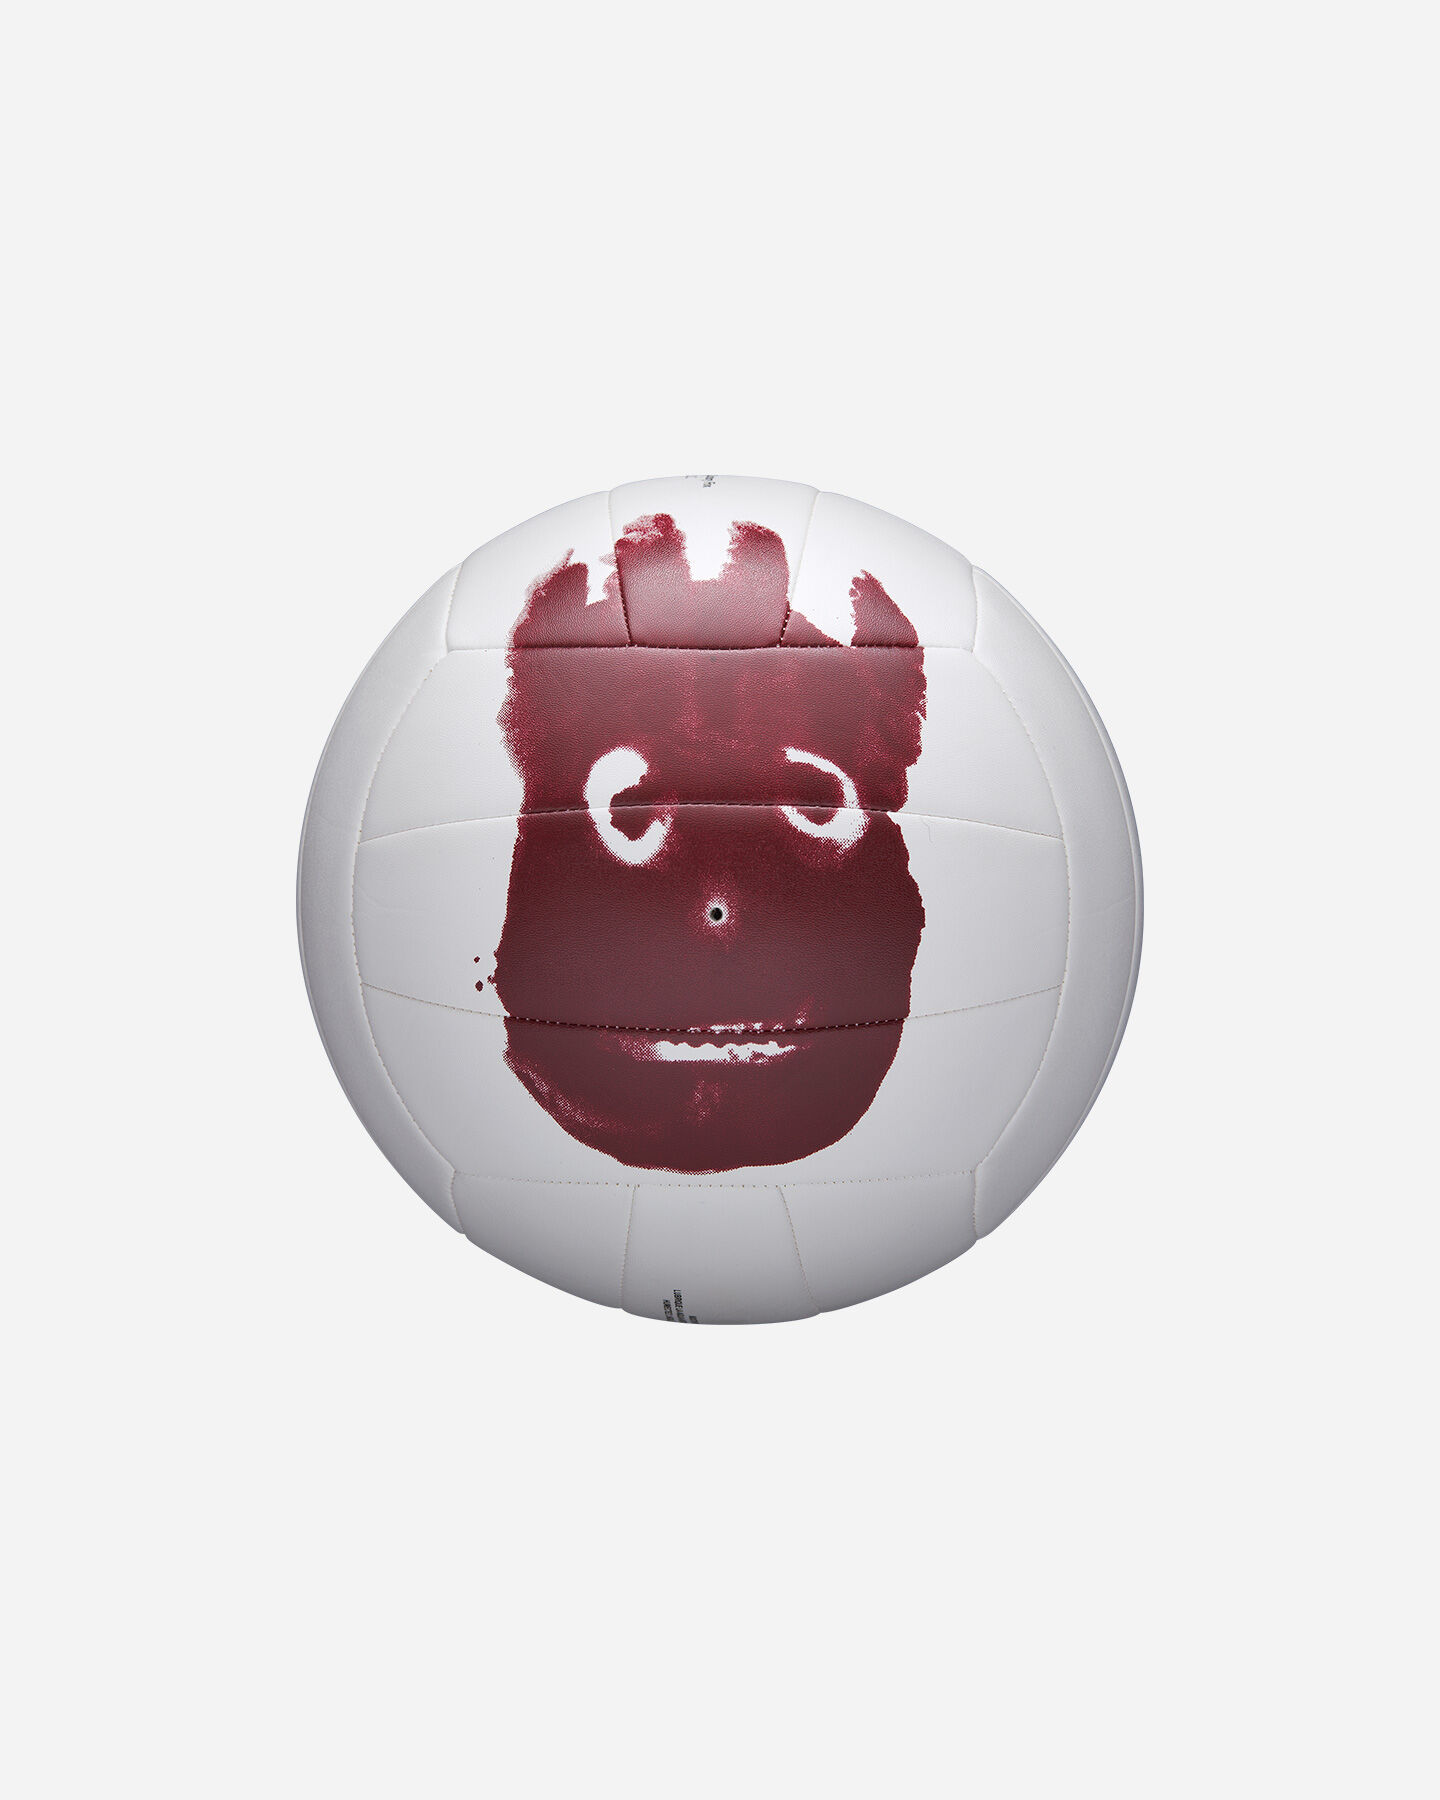  Pallone volley WILSON MR WILSON CASTAWAY  S5121699|UNI|OFFICIAL scatto 0